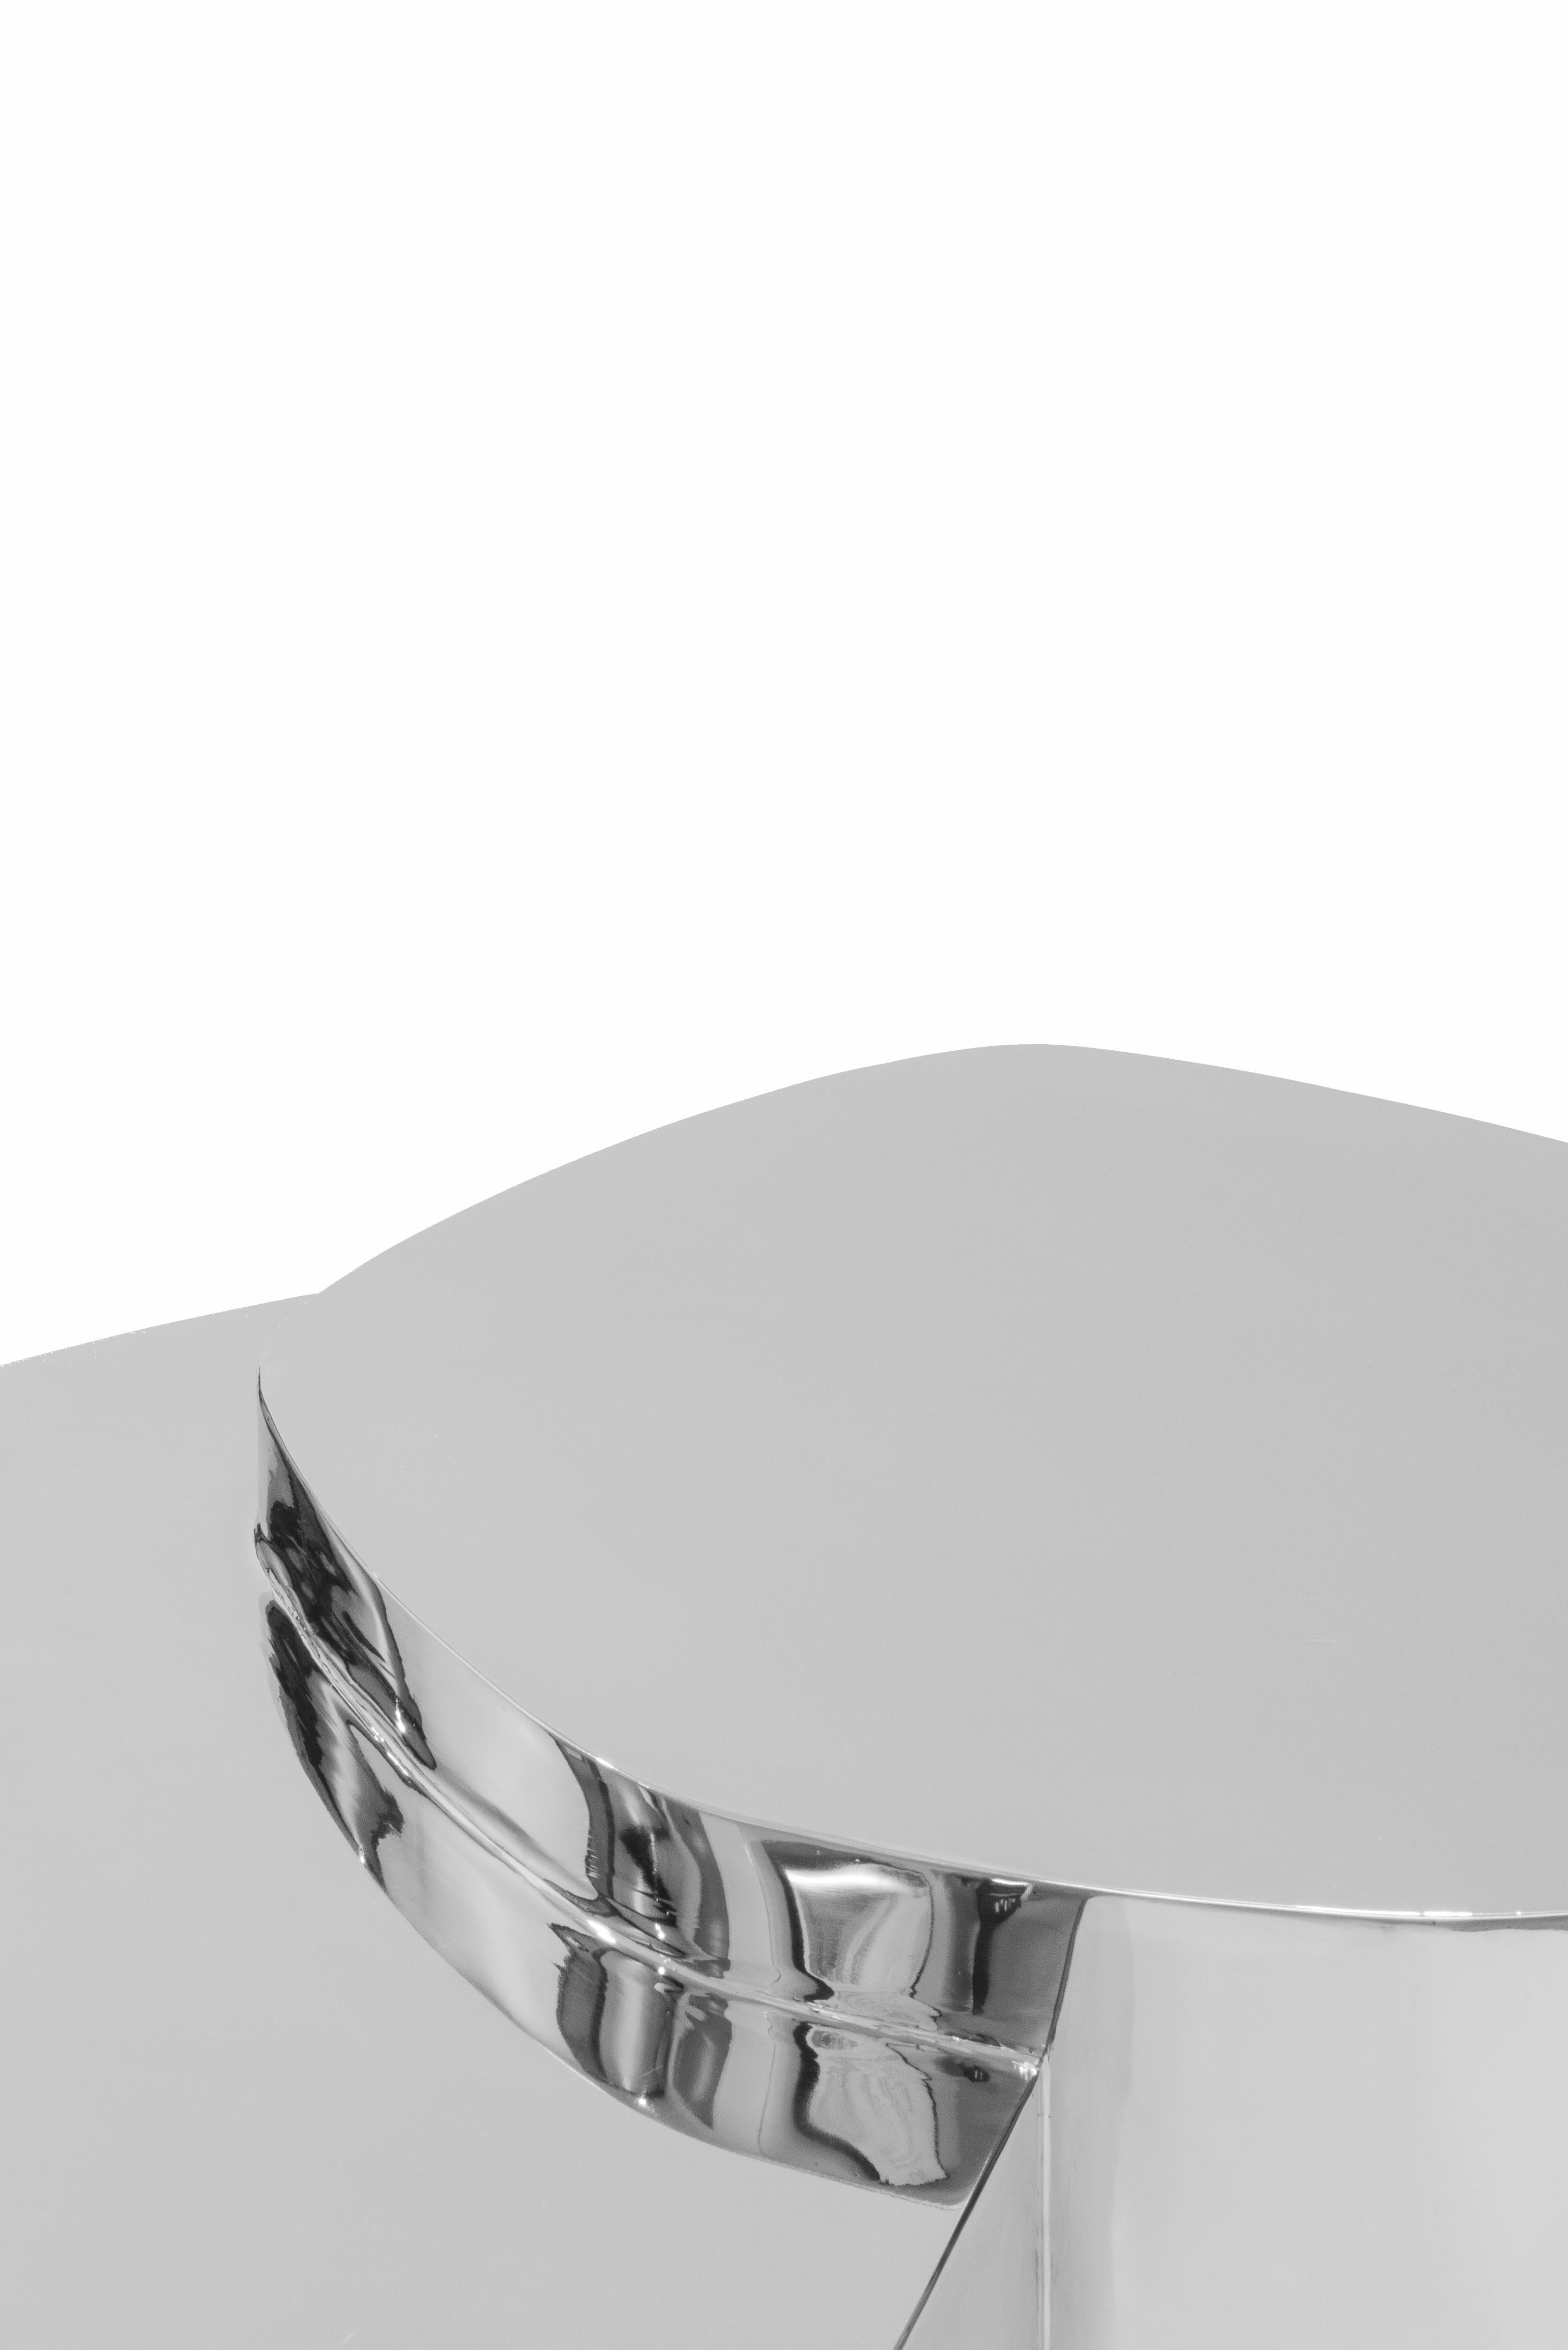 LT01 coffee table in polished steel is presented by Sabourin Costes, France, 2020

LT-01 is a mirror polished low table which manipulates the reflexions and distortions off its surroundings. Its shiny stainless steel shell decompose and